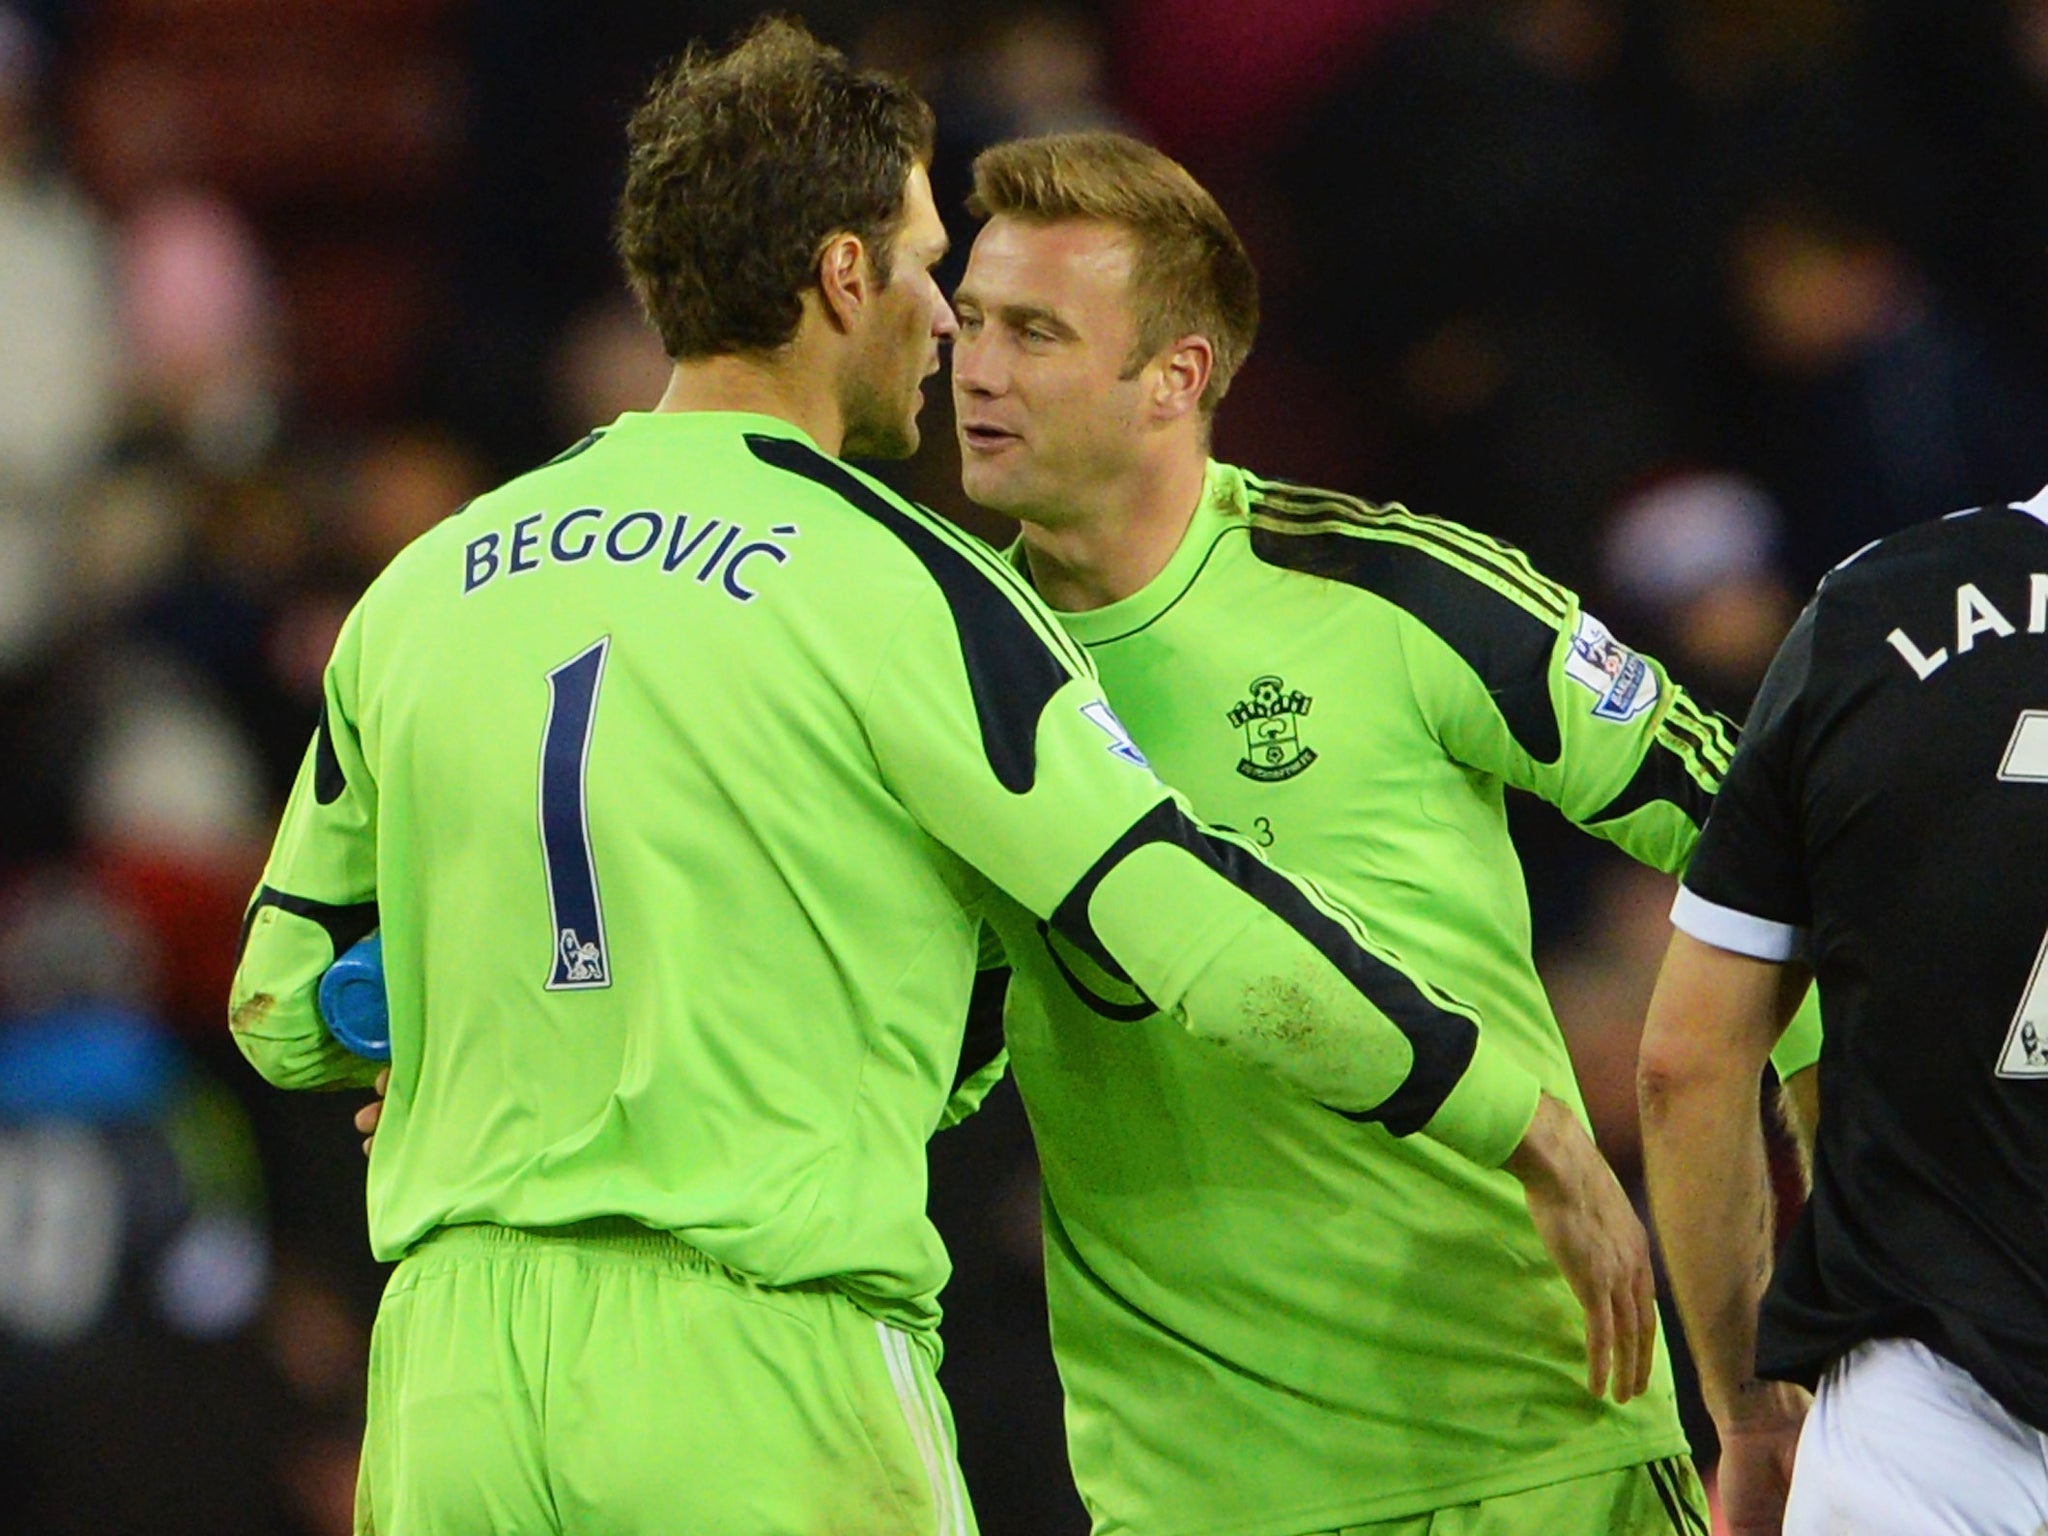 Artur Boruc congratulates Asmir Begovic after he scored from 100-yards out